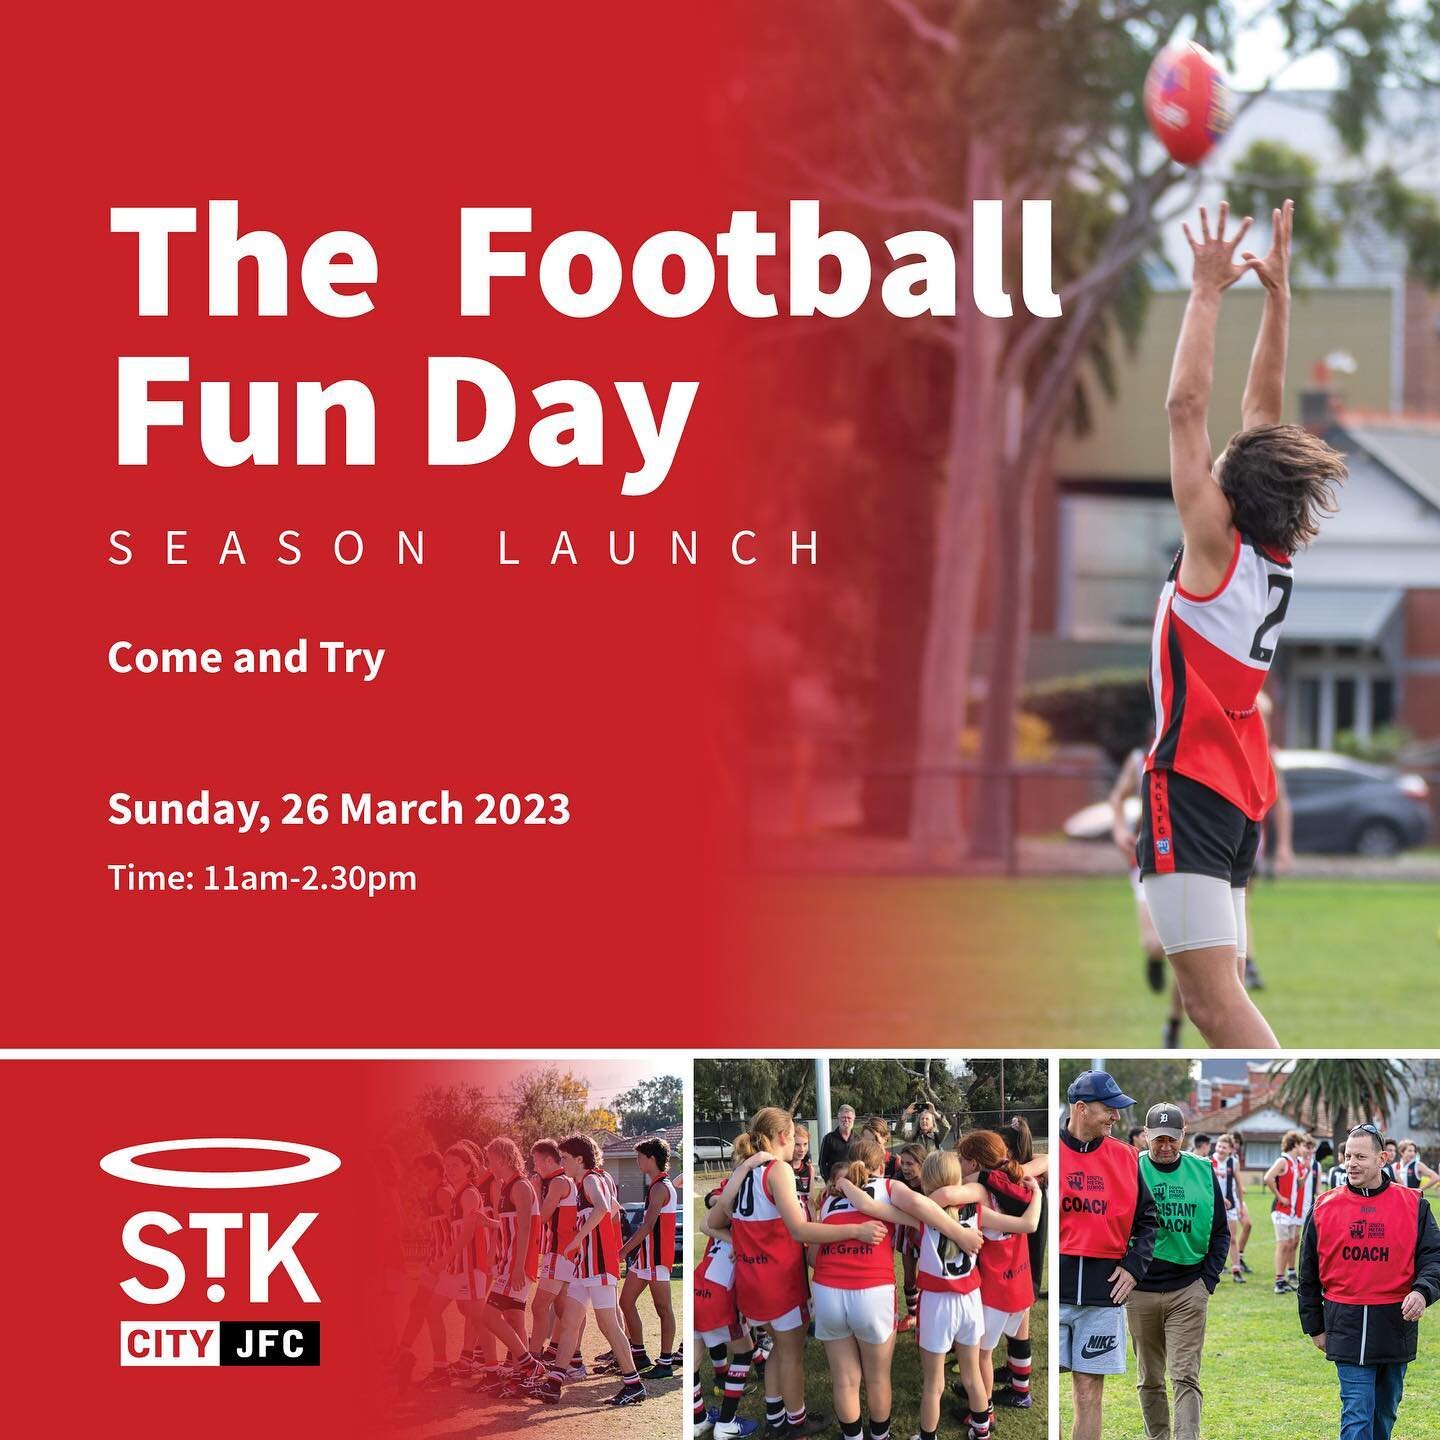 JOIN US FOR OUR 2023 FOOTBALL FUN DAY SEASON LAUNCH

When: Sunday 26th March 2023

Where: Wattie Watson Main Oval

Girls Session 11am-12noon
BBQ Lunch 12noon - 1pm
Boys Session 1pm - 2pm

Email info@stkildacityjfc.com.au for more details and we hope 